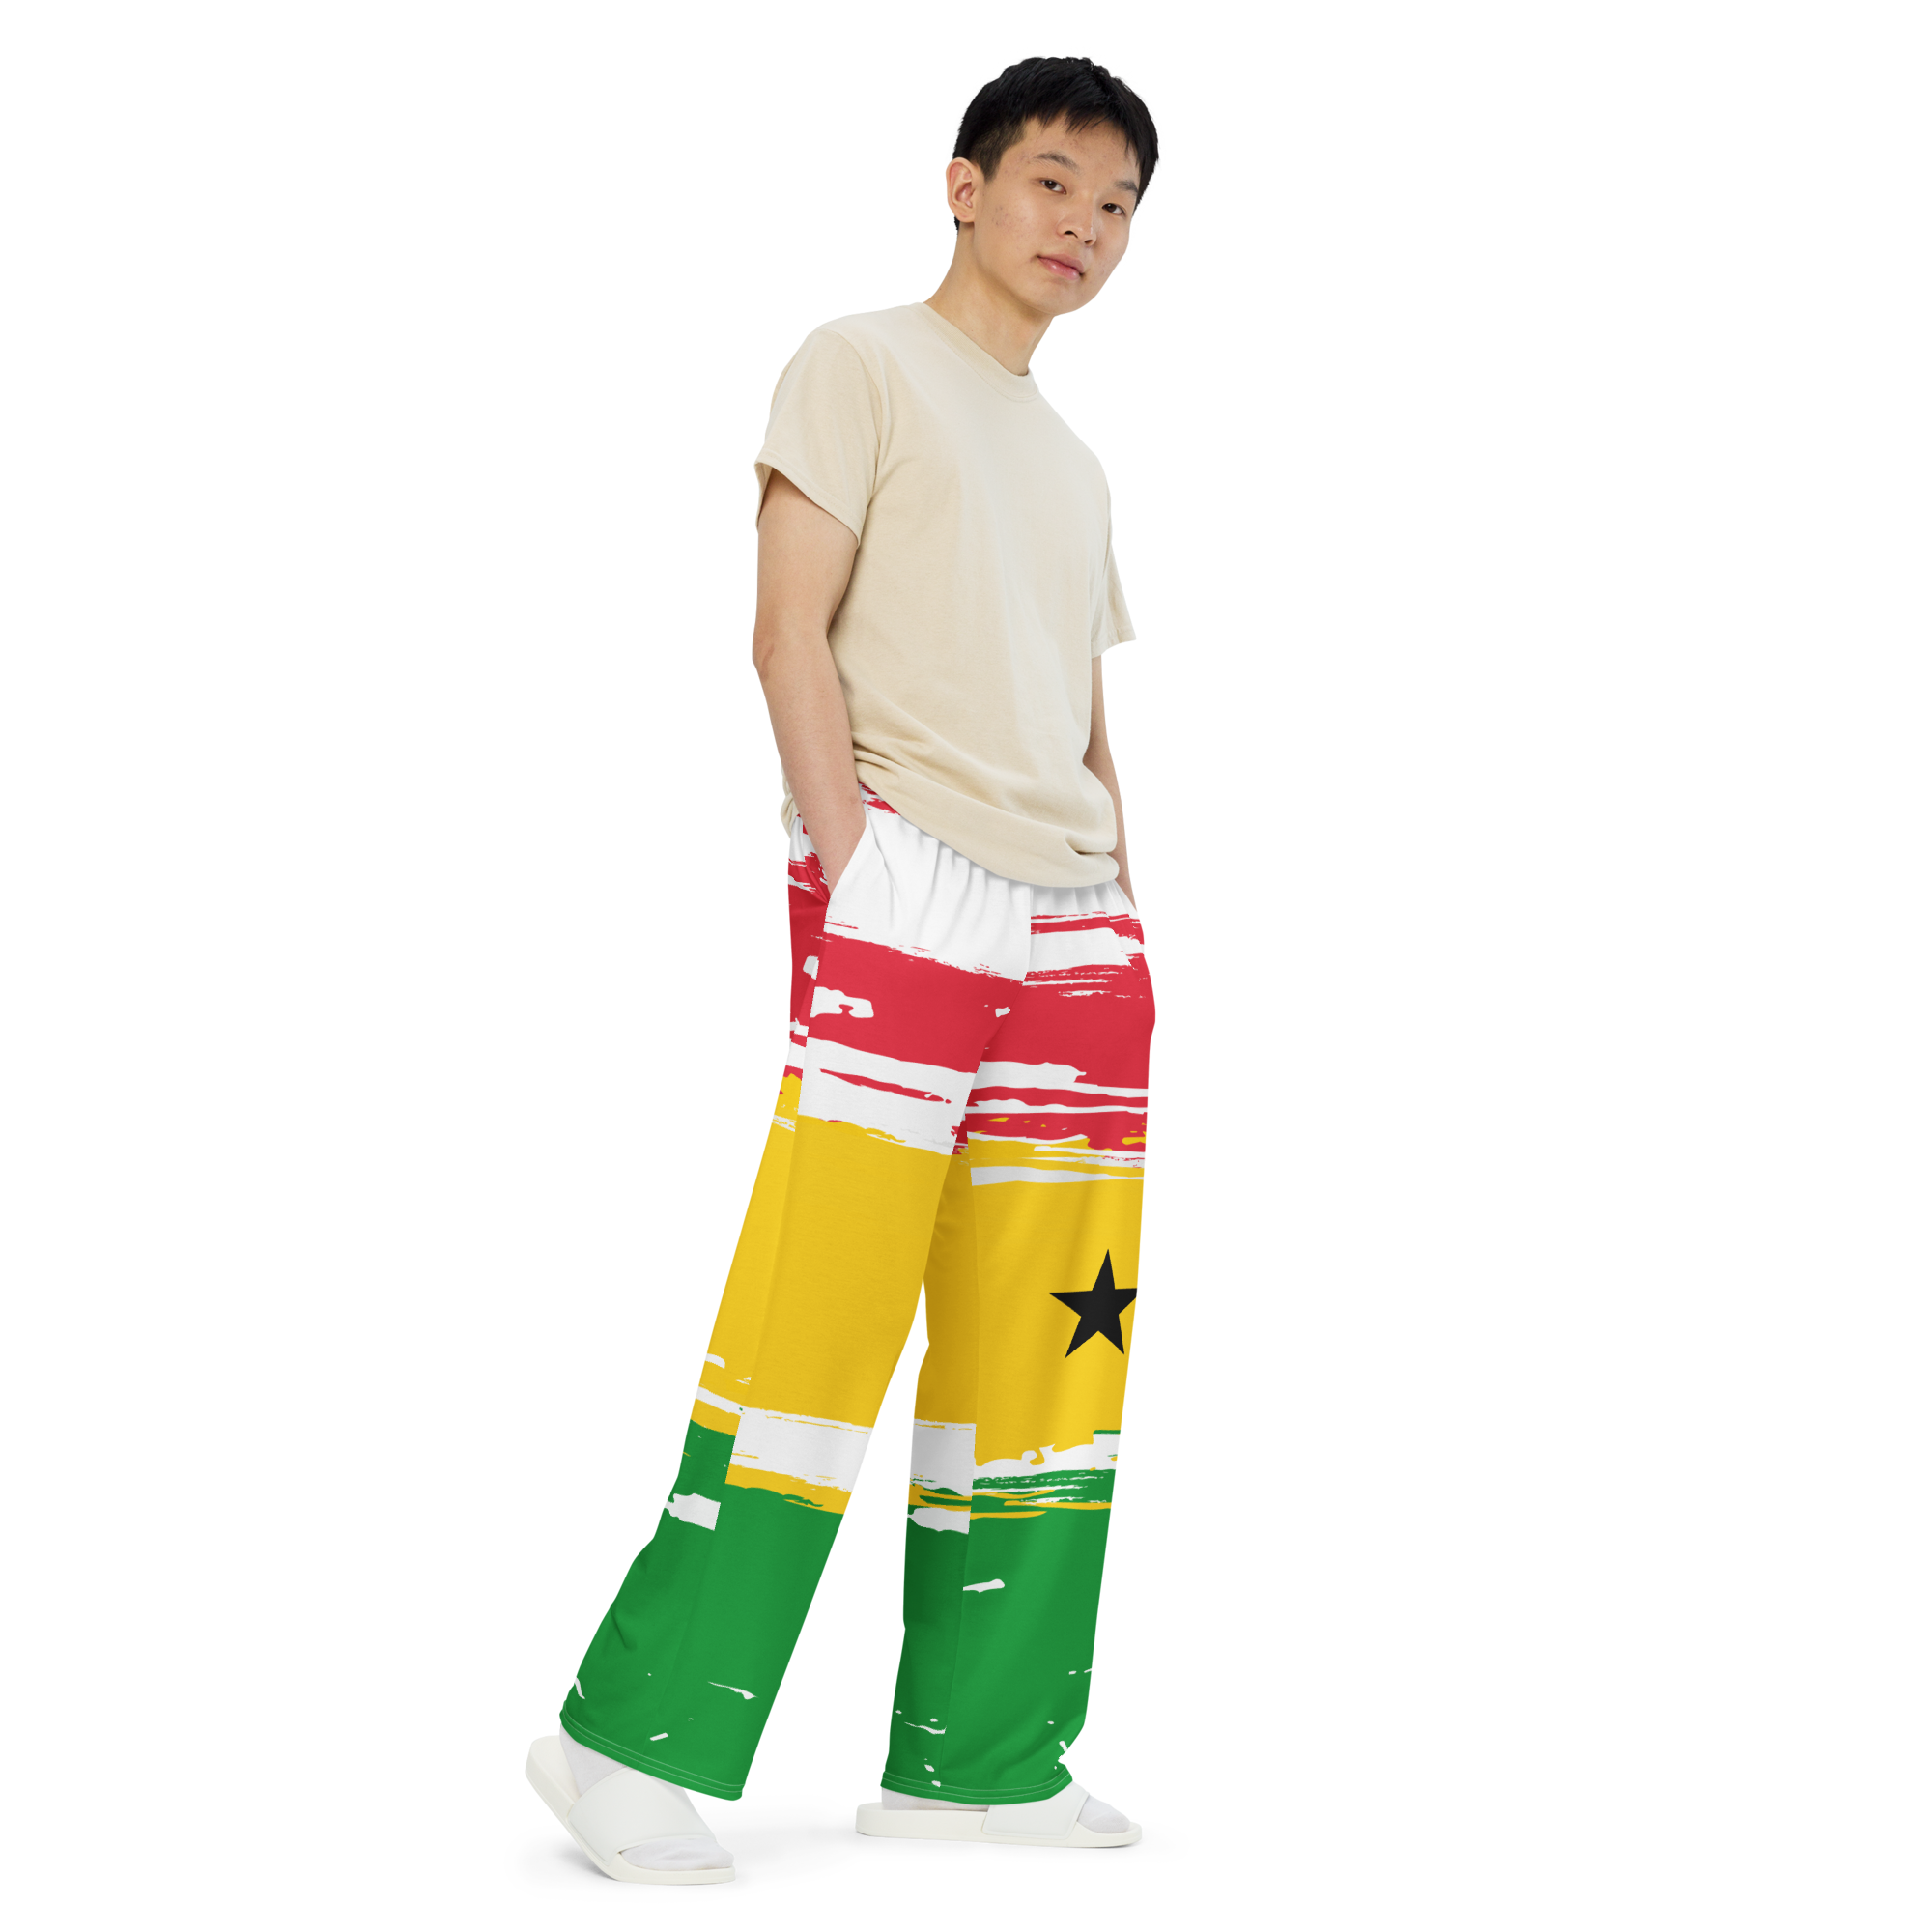 Senegal Flag Inspired volleyball wide legged sweatpant designs sold in my Volleybragswag Etsy shop.